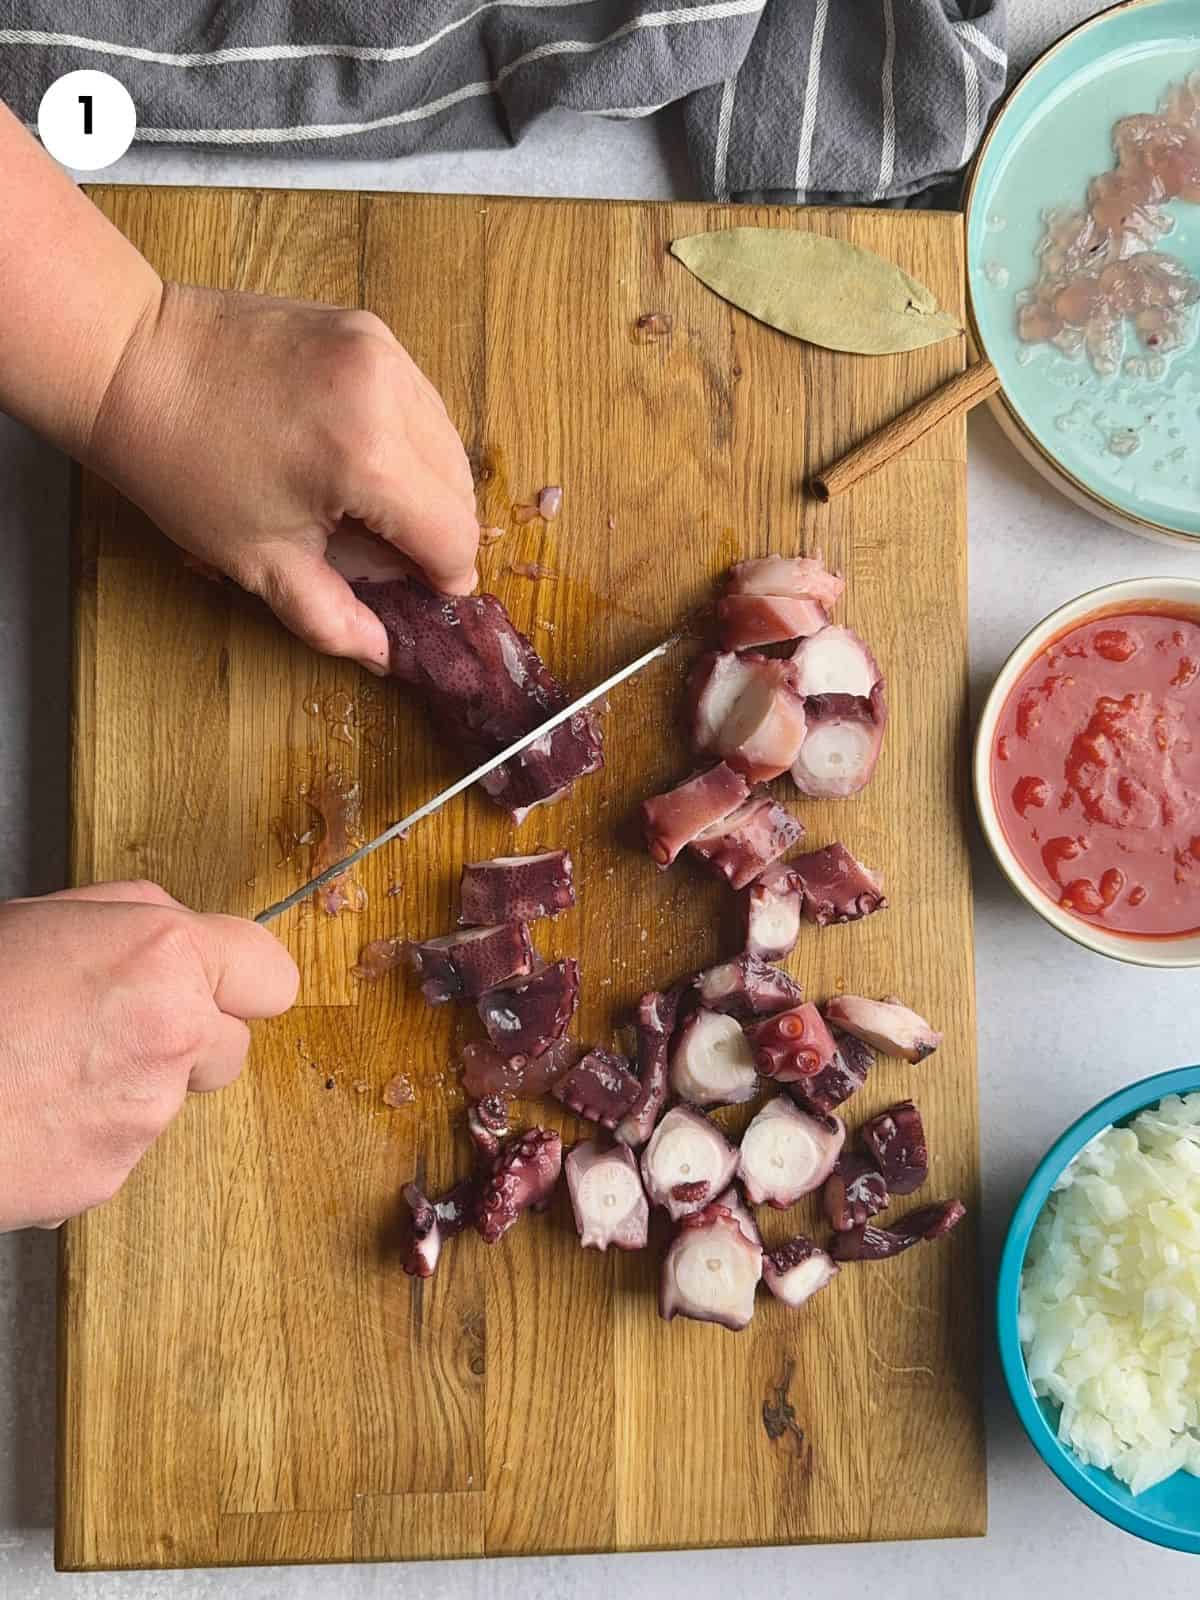 Chopping the octopus into chunks.